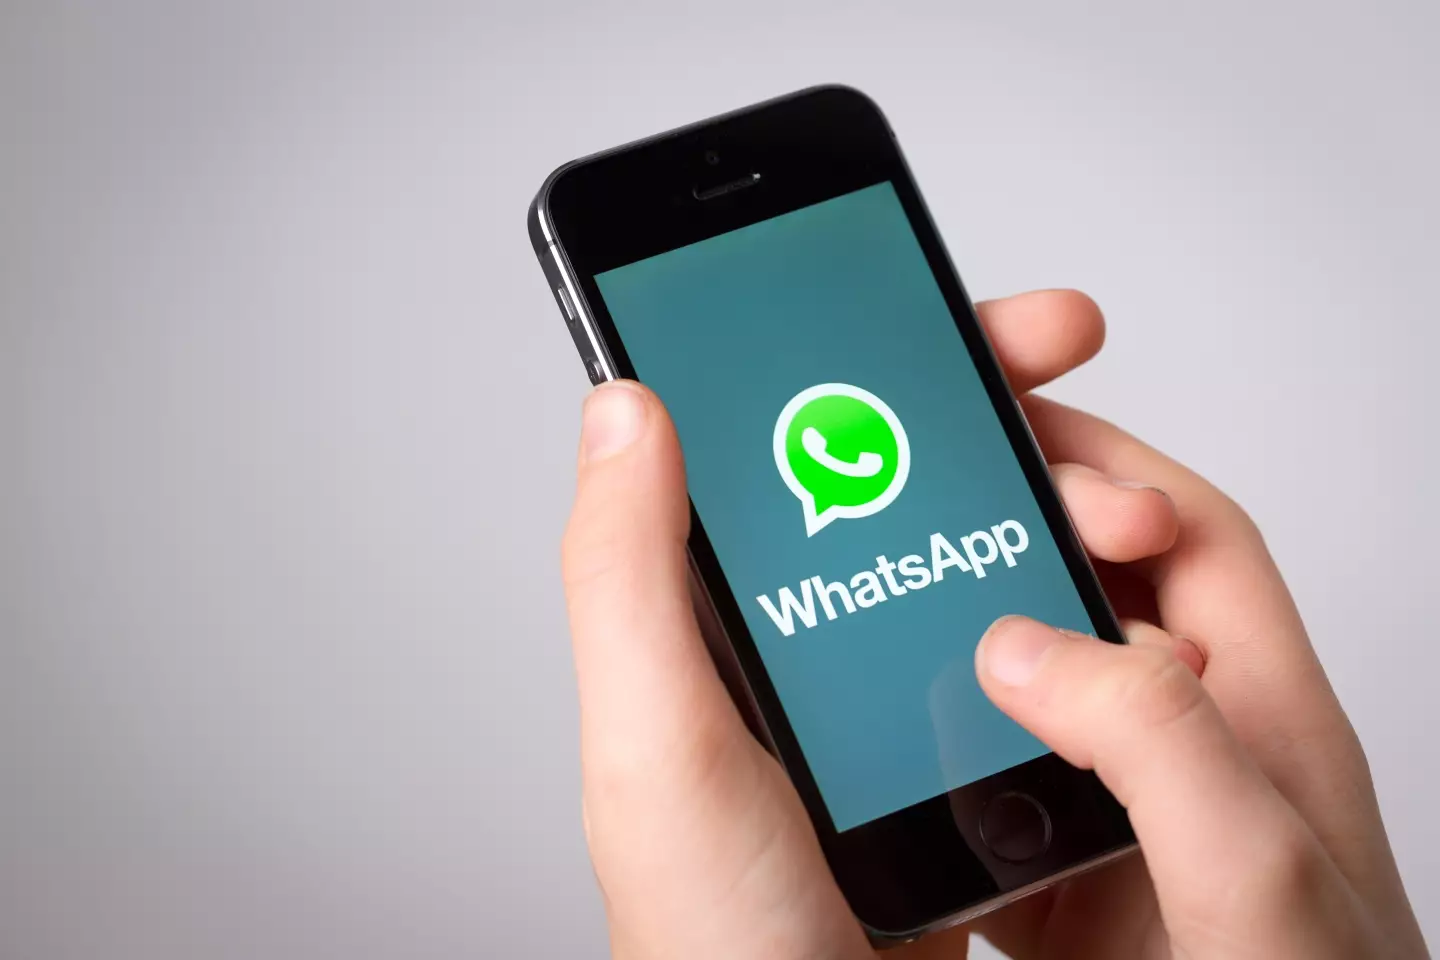 A new feature is being rolled out on WhatsApp today.